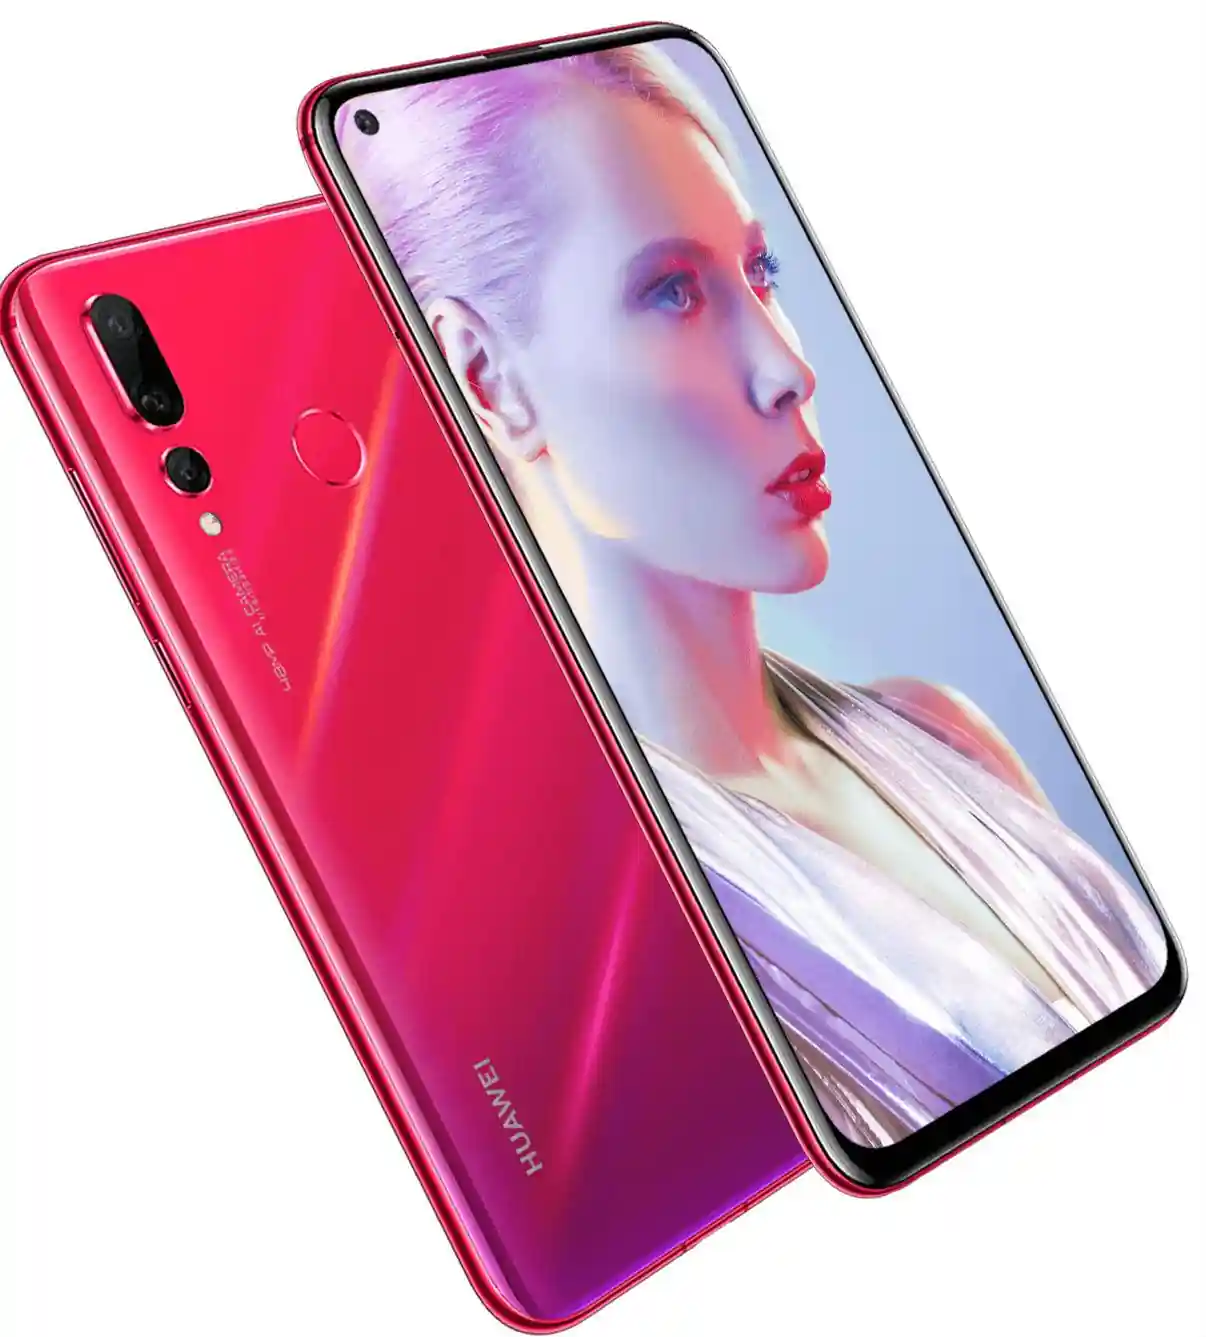  Flyme OS  Huawei nova 4 Standard version  Android 10, 9.1(0)